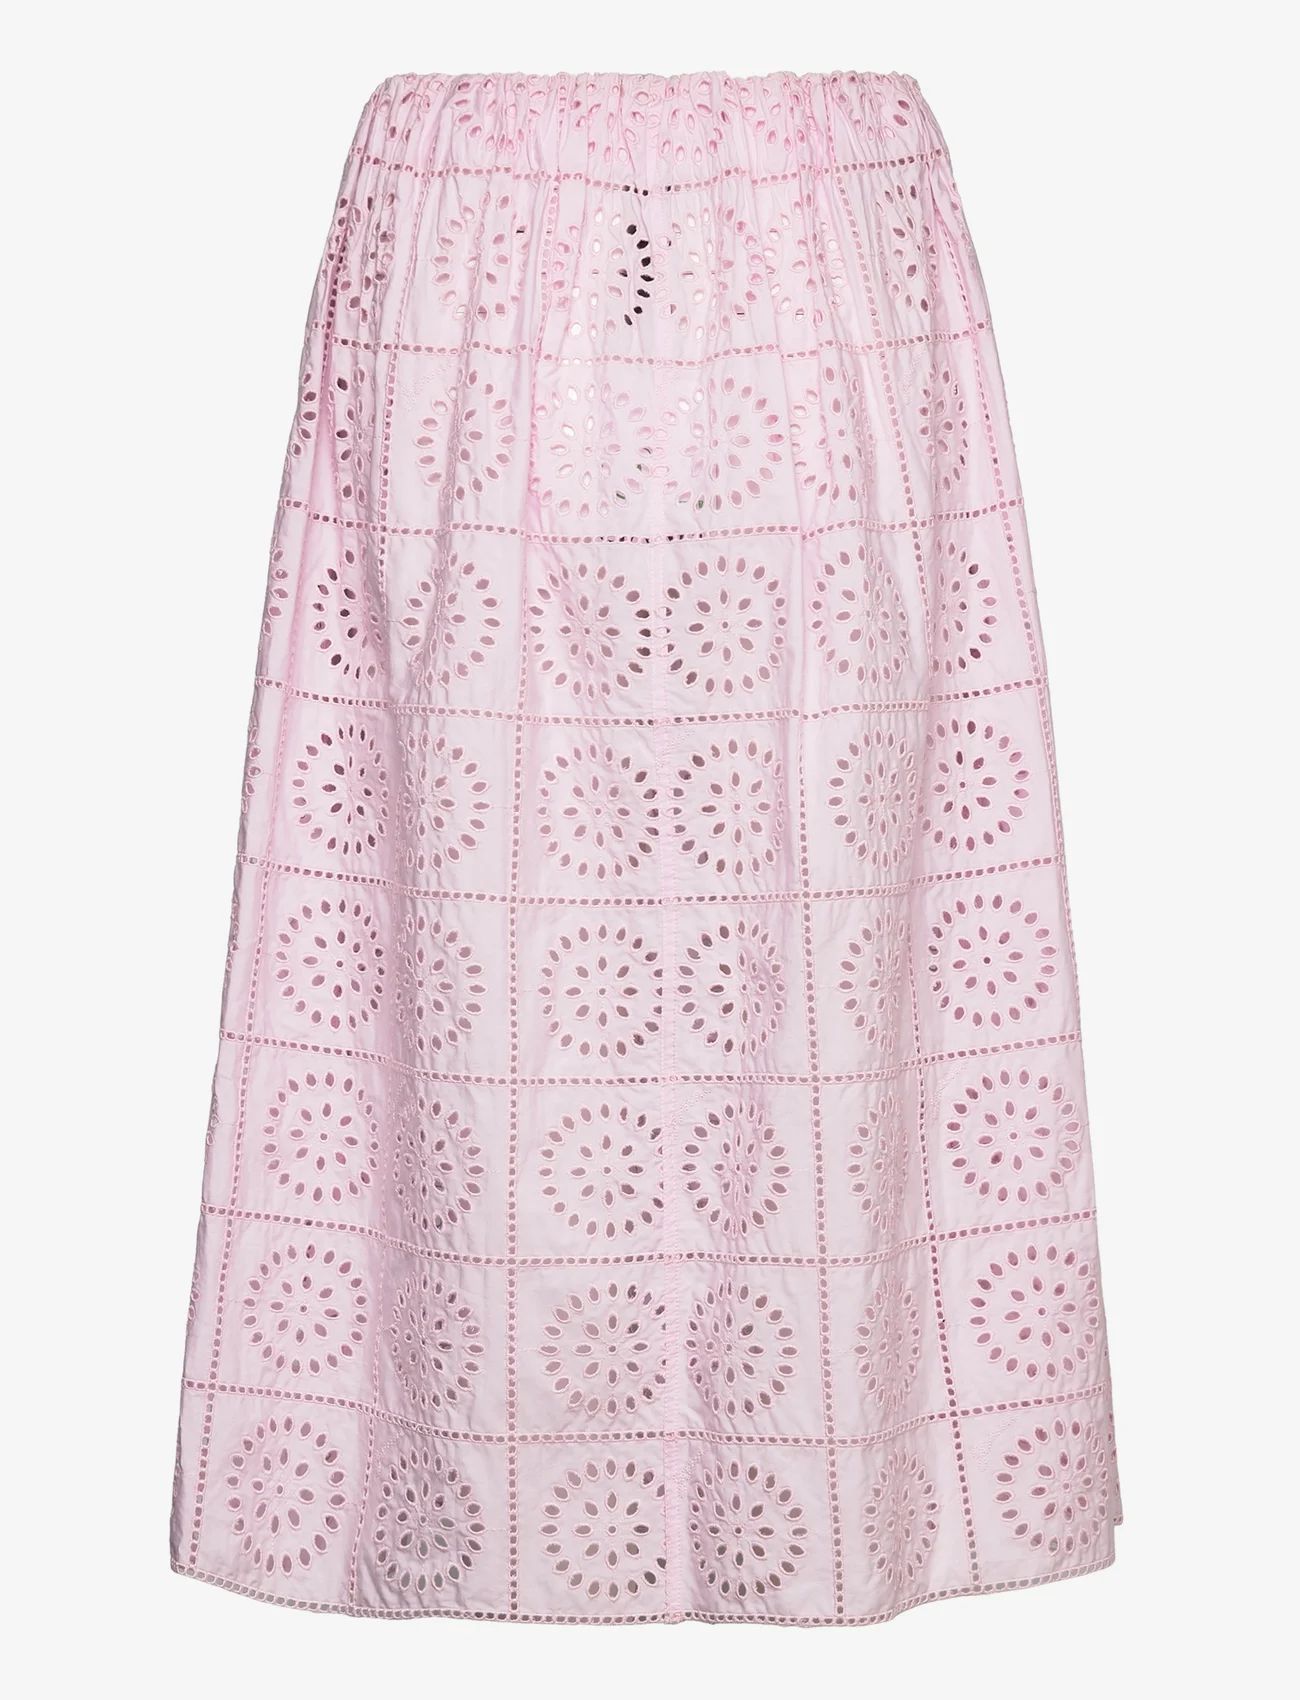 Ganni - Broderie Anglaise - midi skirts - pink tulle - 1